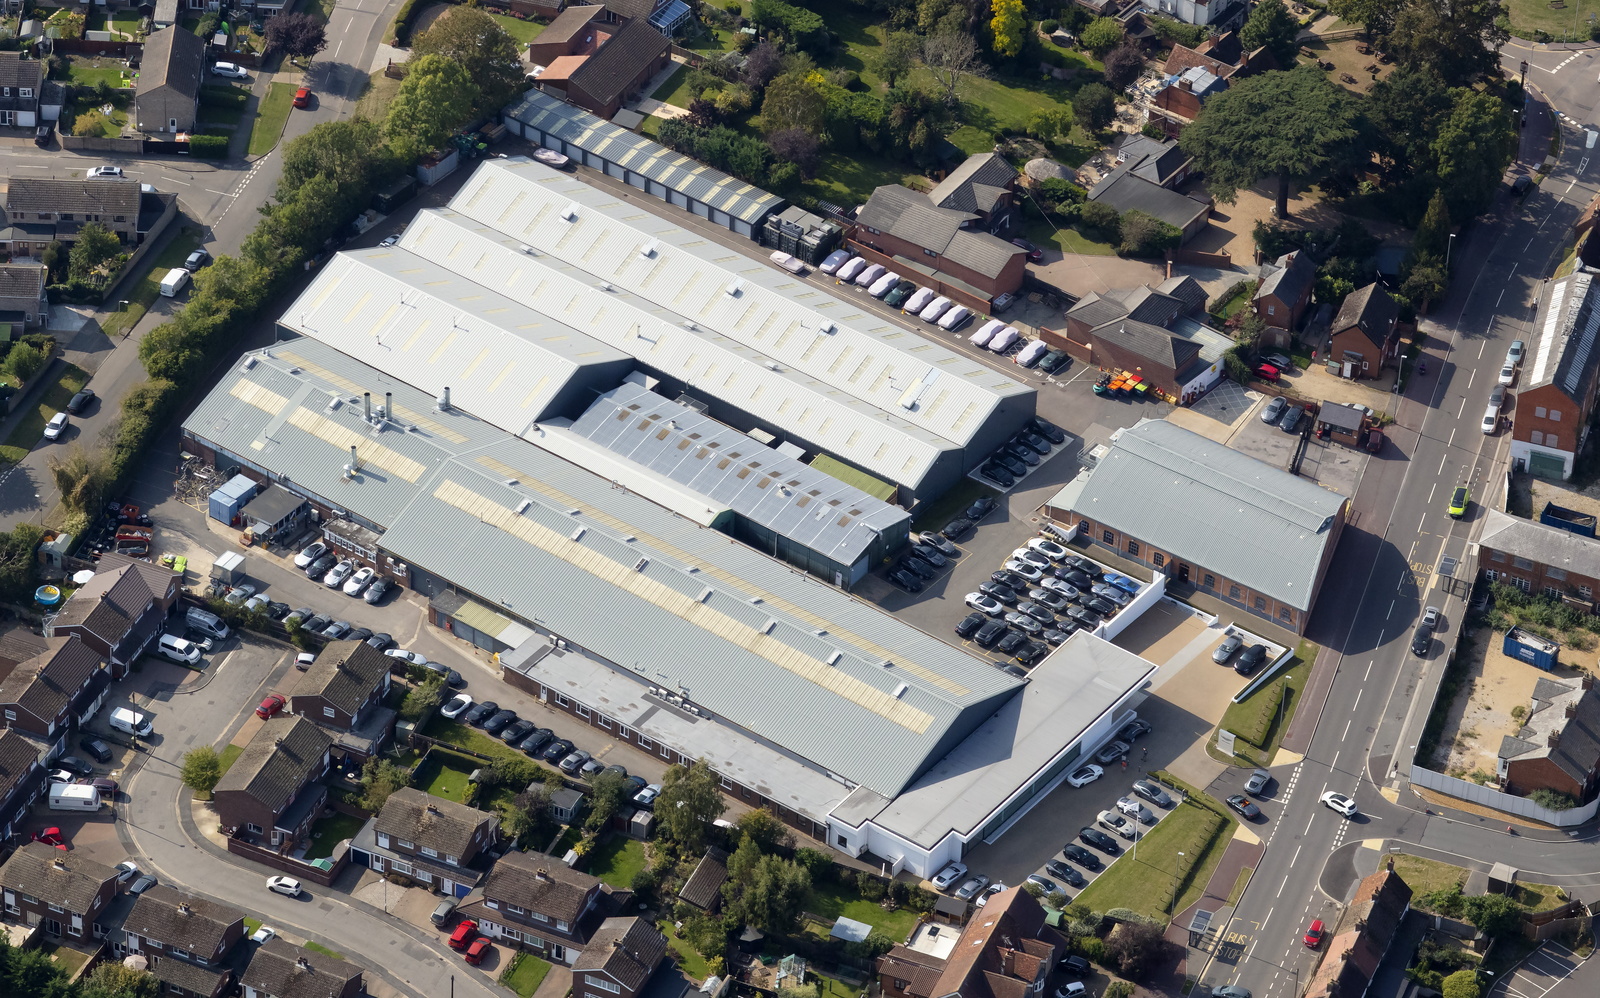 Aston Martin Works,Newport Pagnell from the air